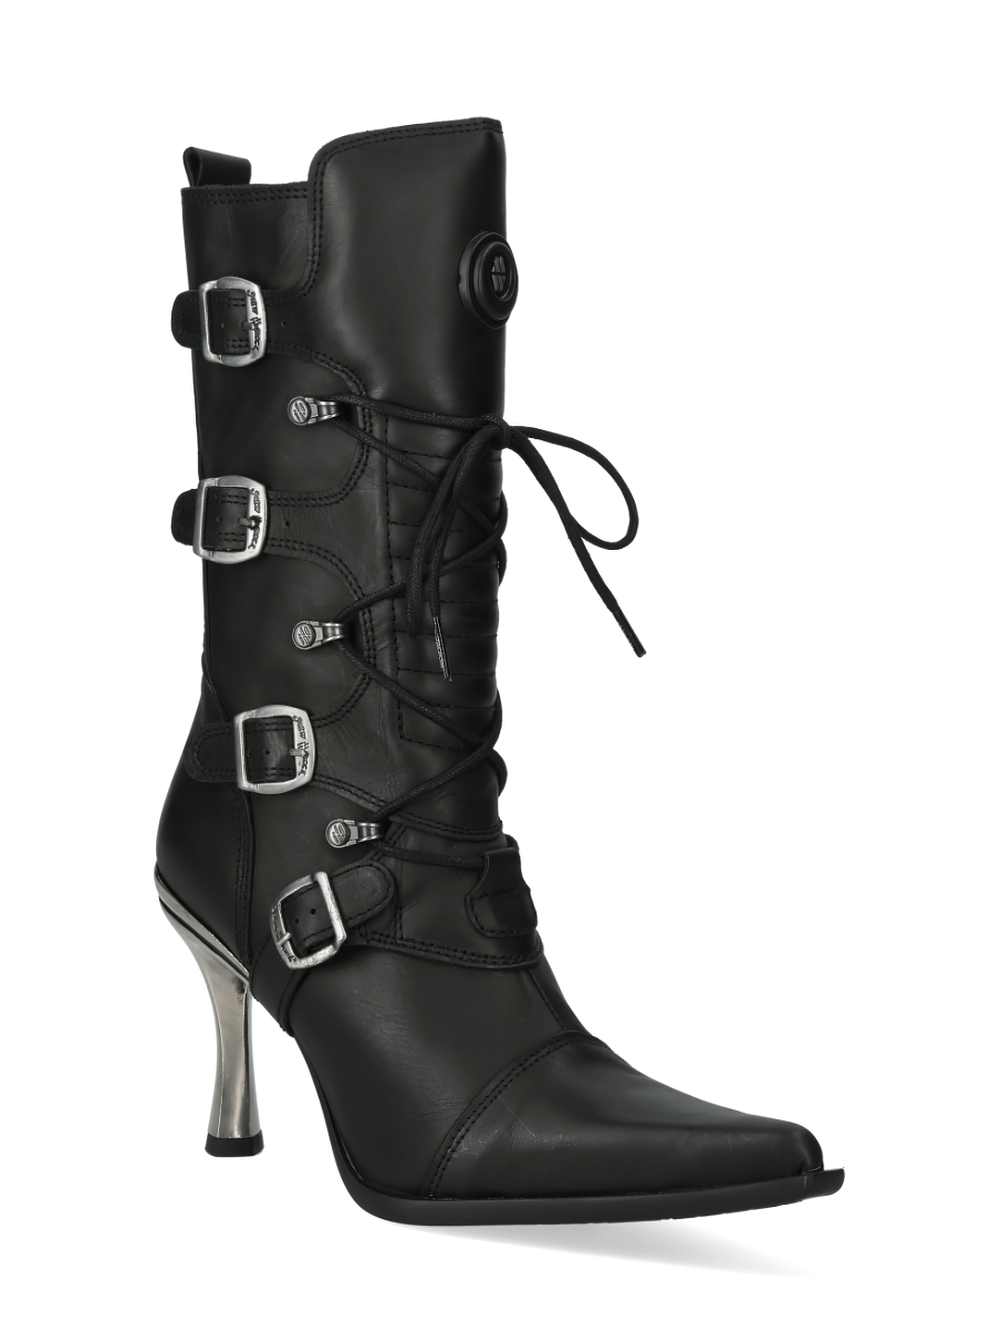 NEW ROCK Laced High-Heel Boots with Metallic Accents